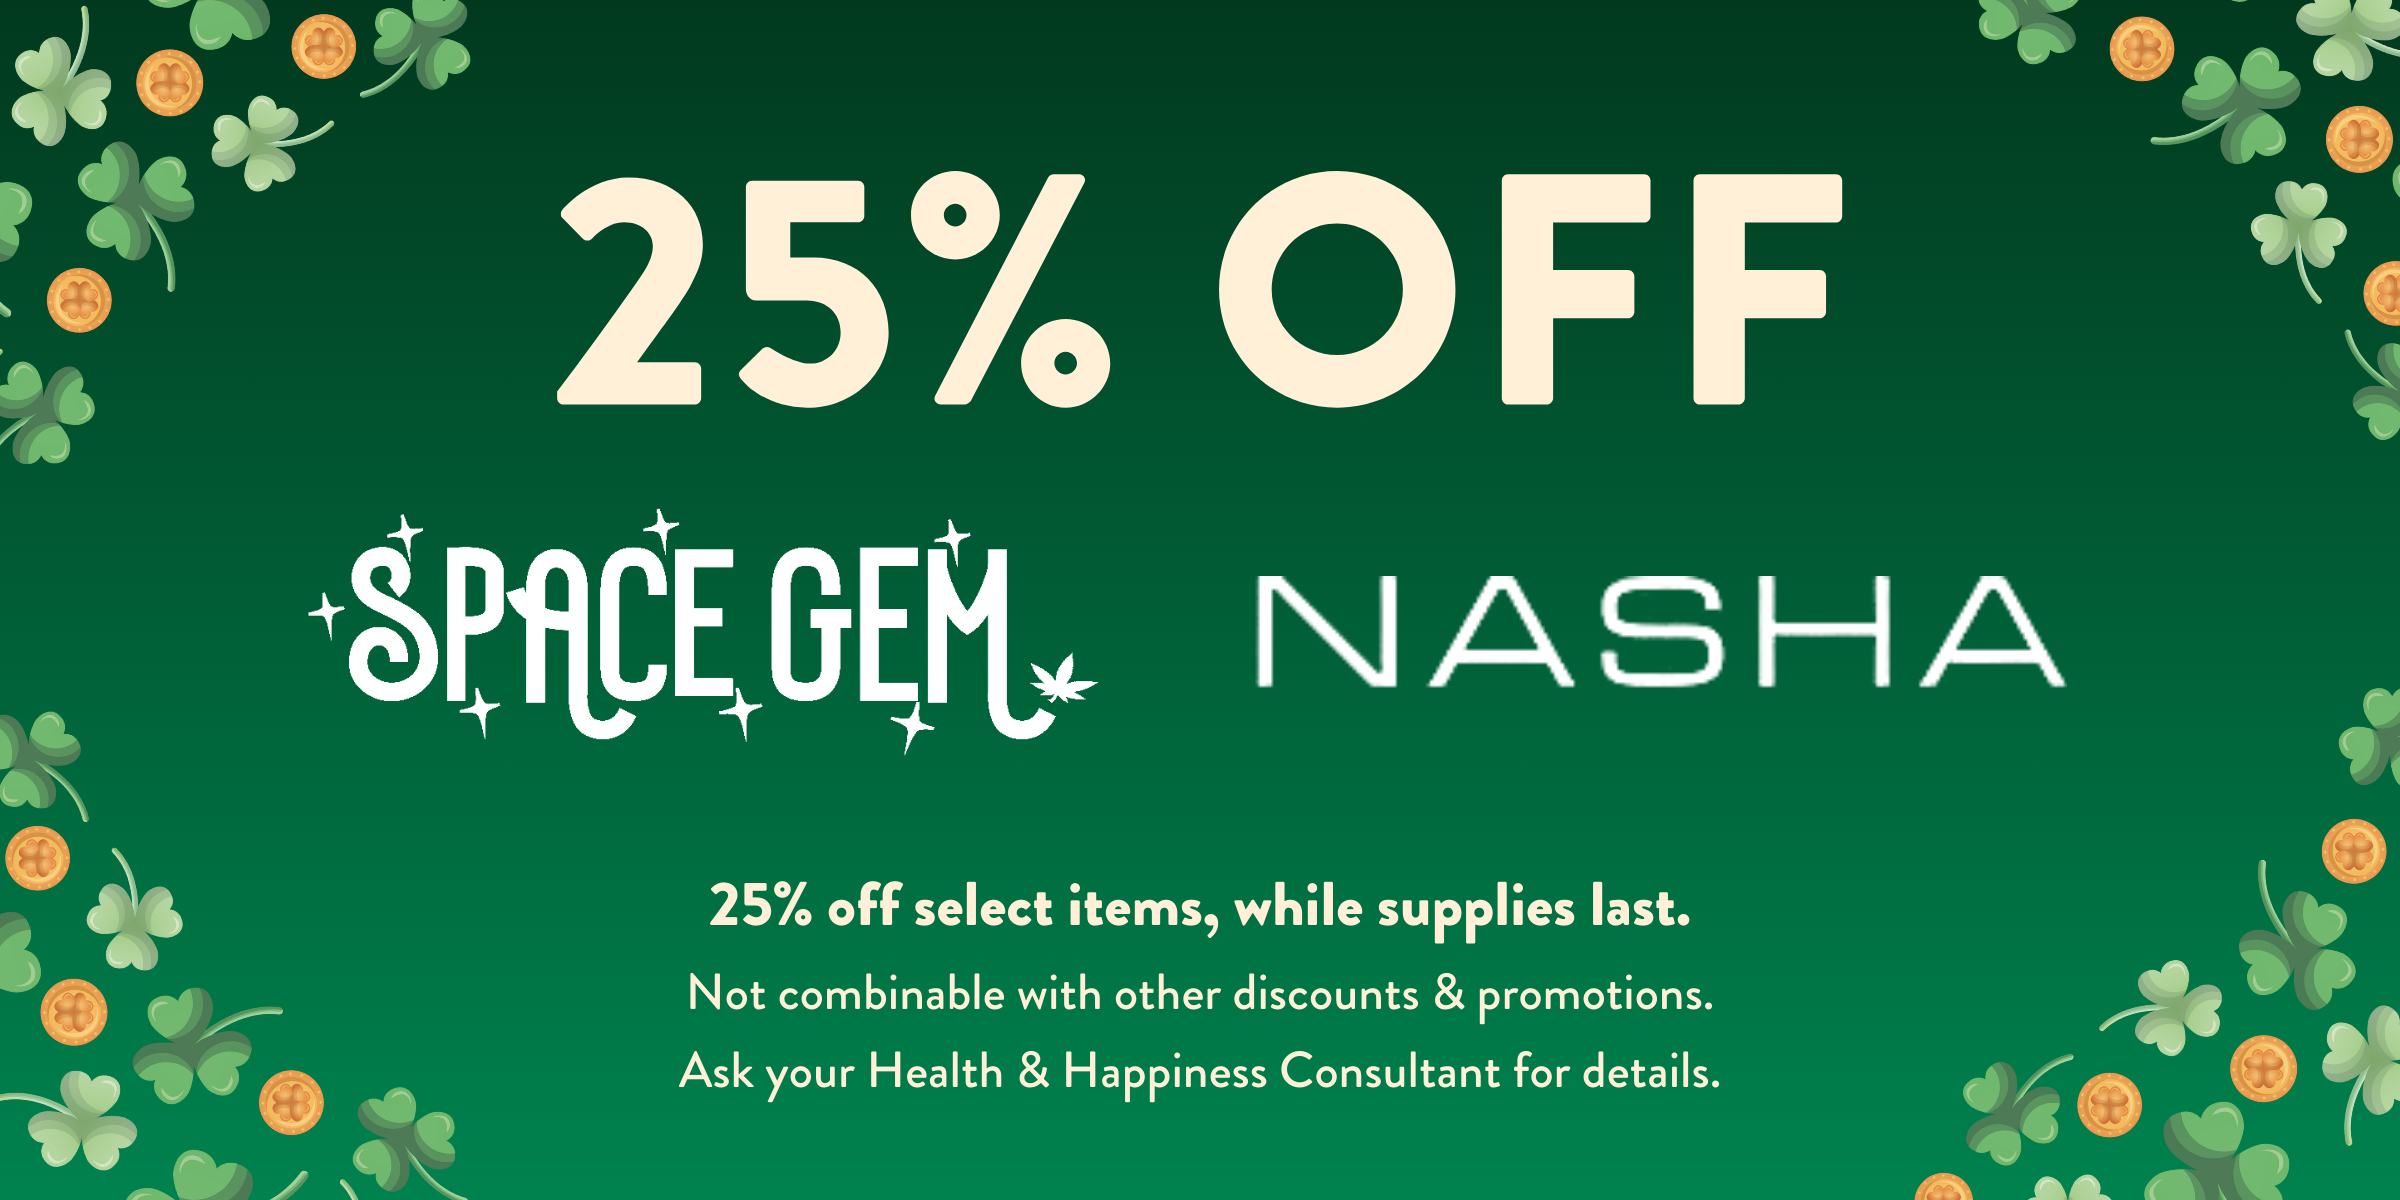 25% off Space Gem and Nasha, while supplies last